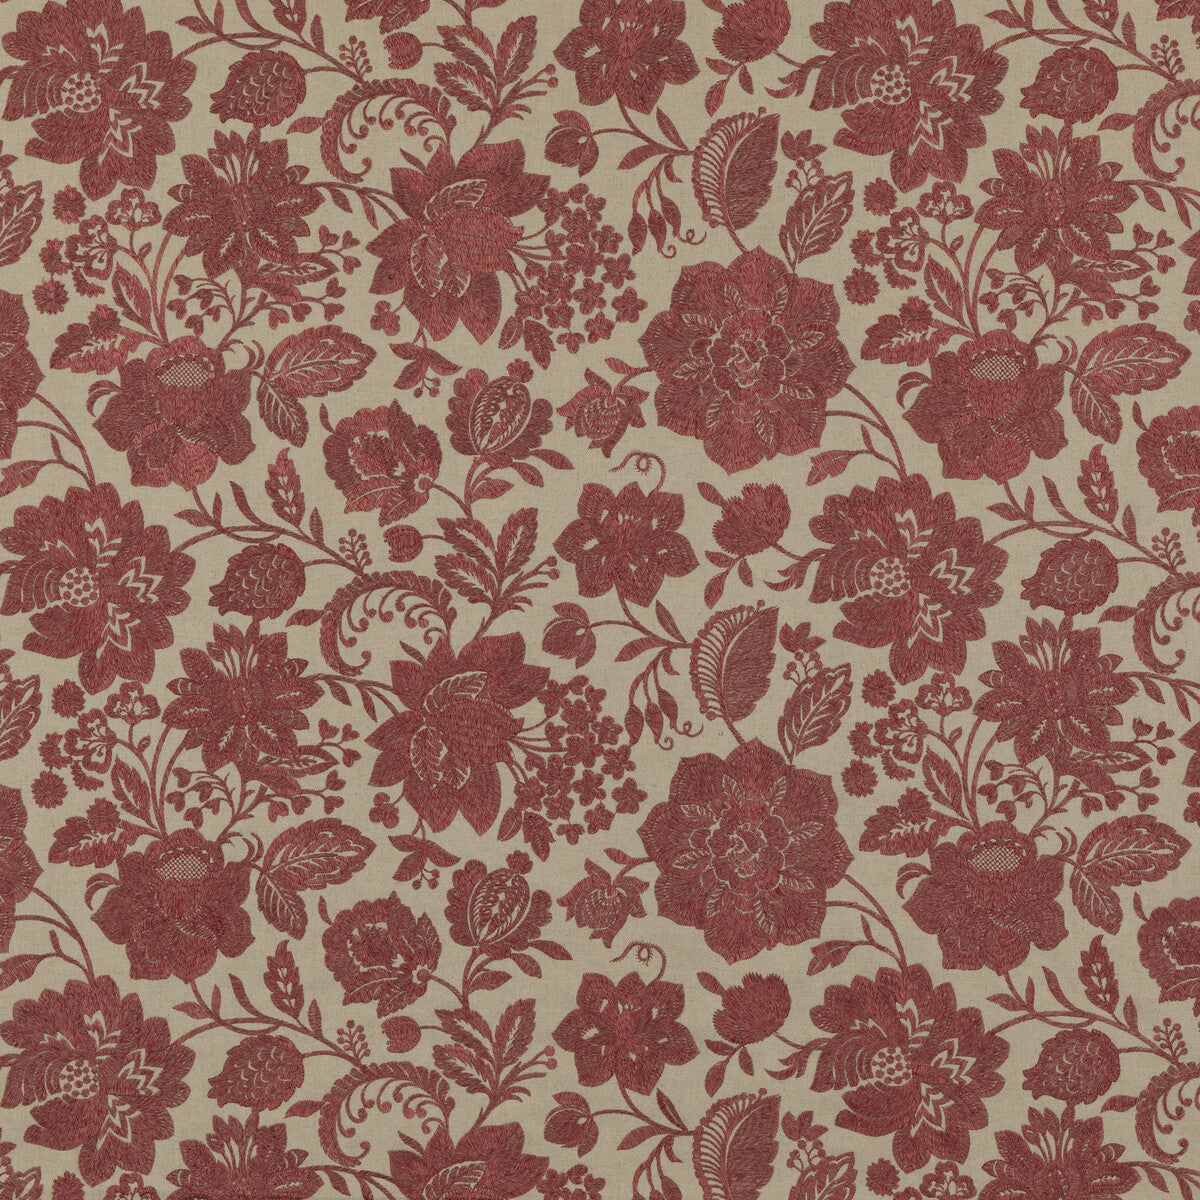 Berwick fabric in red color - pattern BF10918.2.0 - by G P &amp; J Baker in the Portobello collection